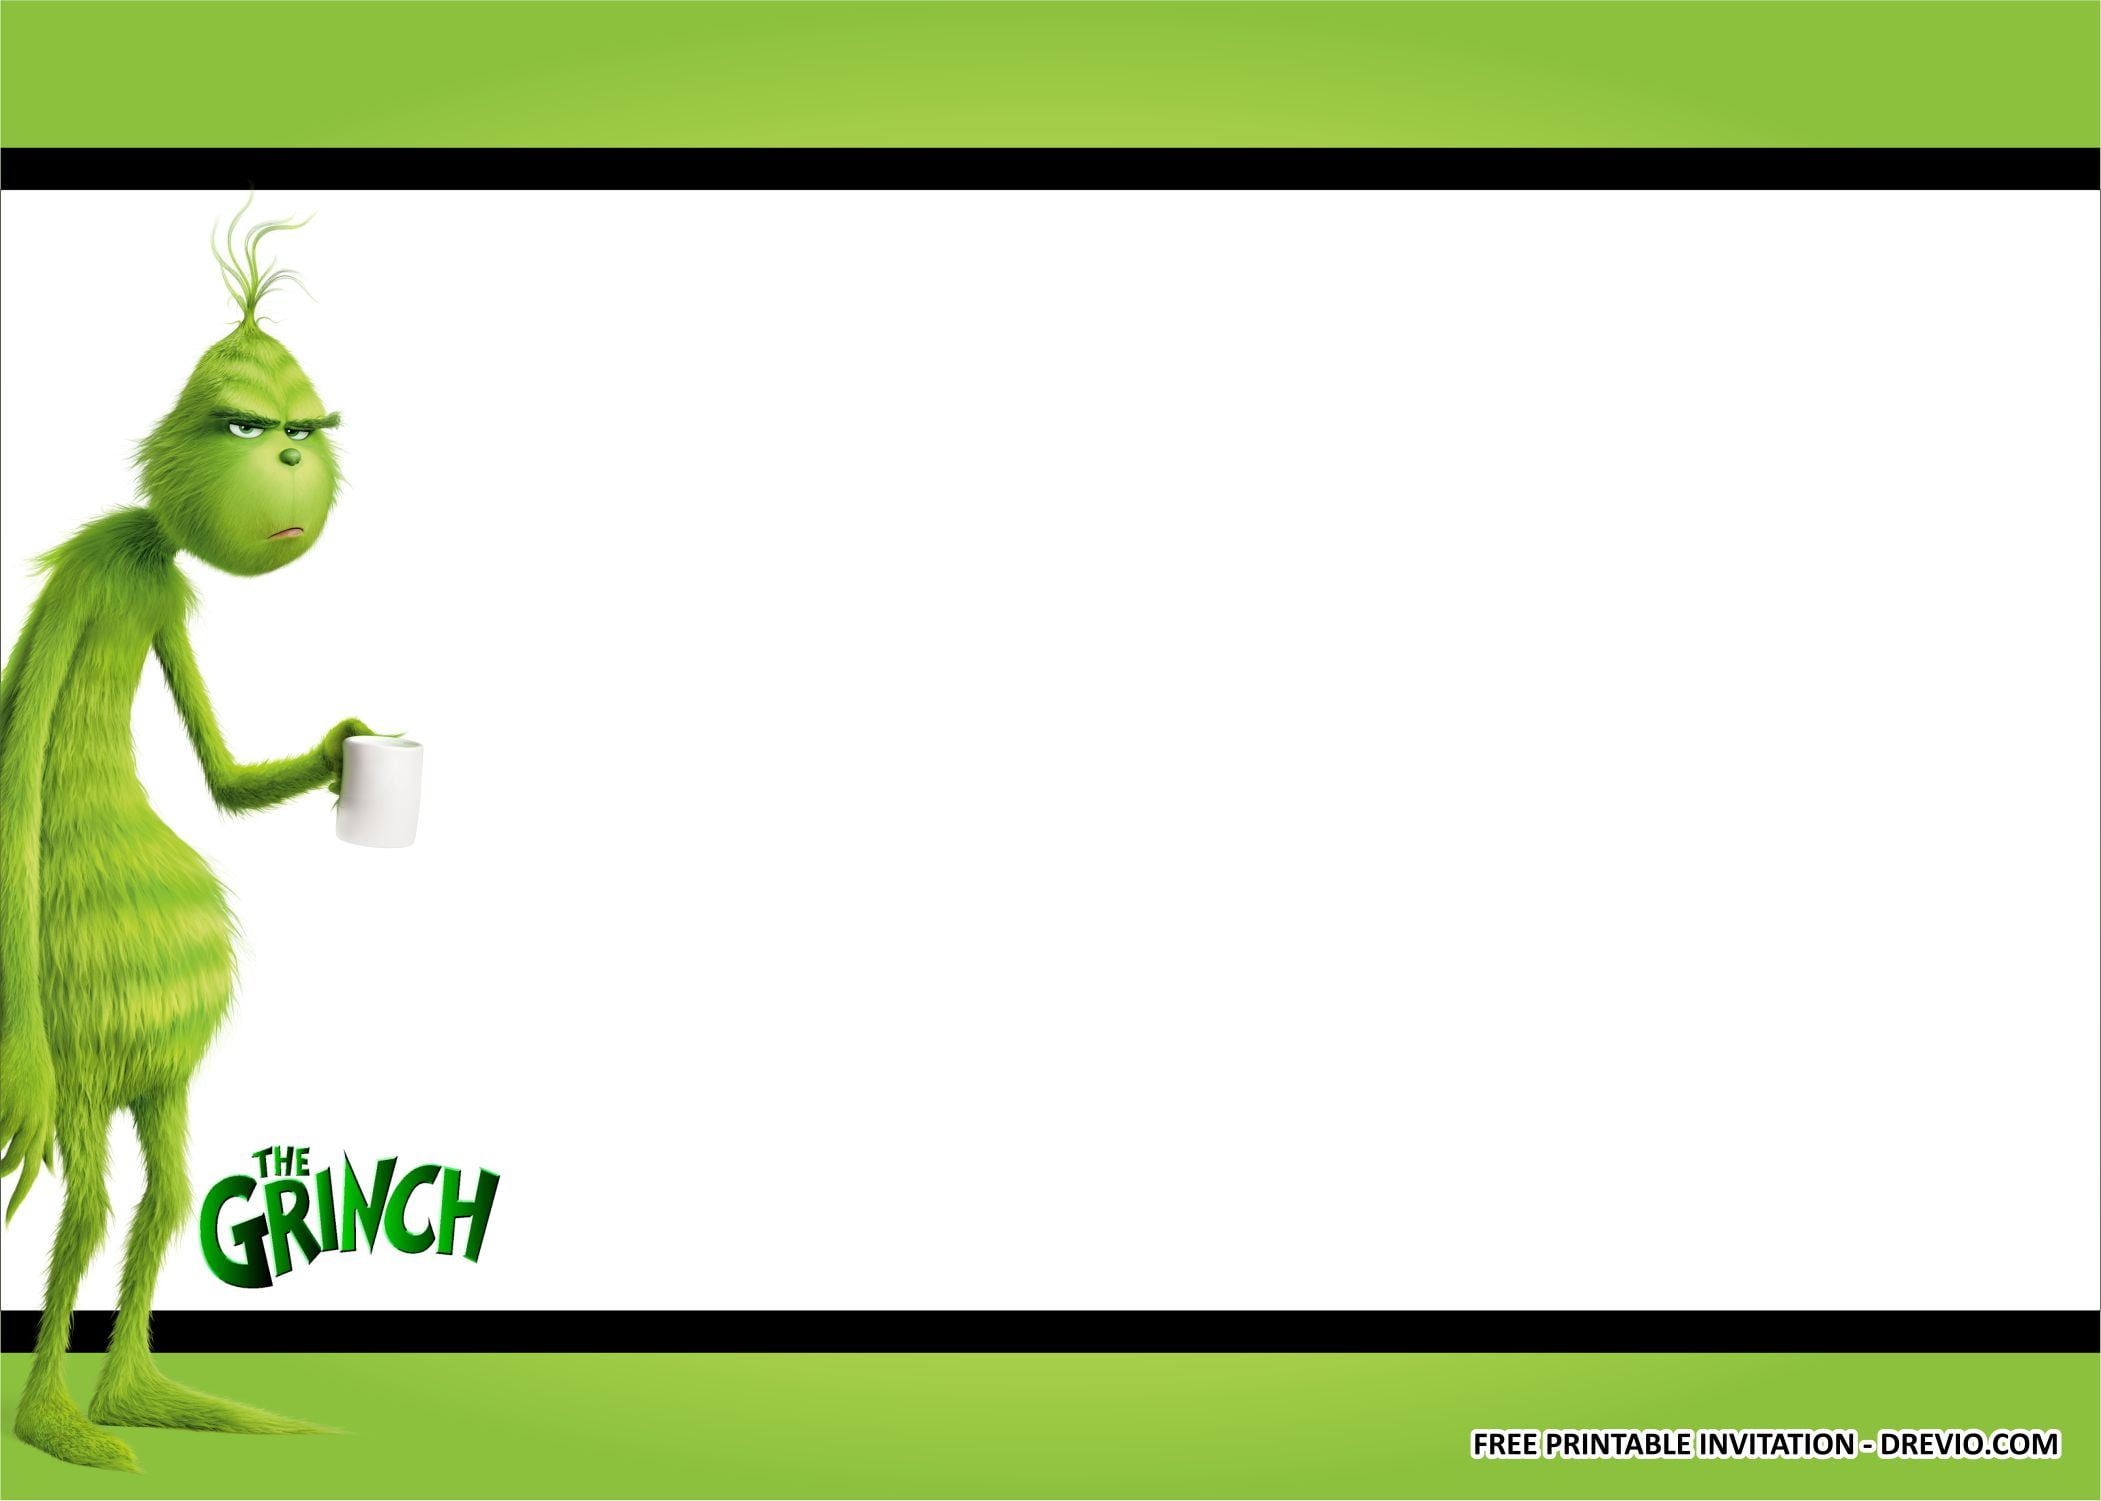 the-grinch-invitation-templates-1-download-hundreds-free-printable